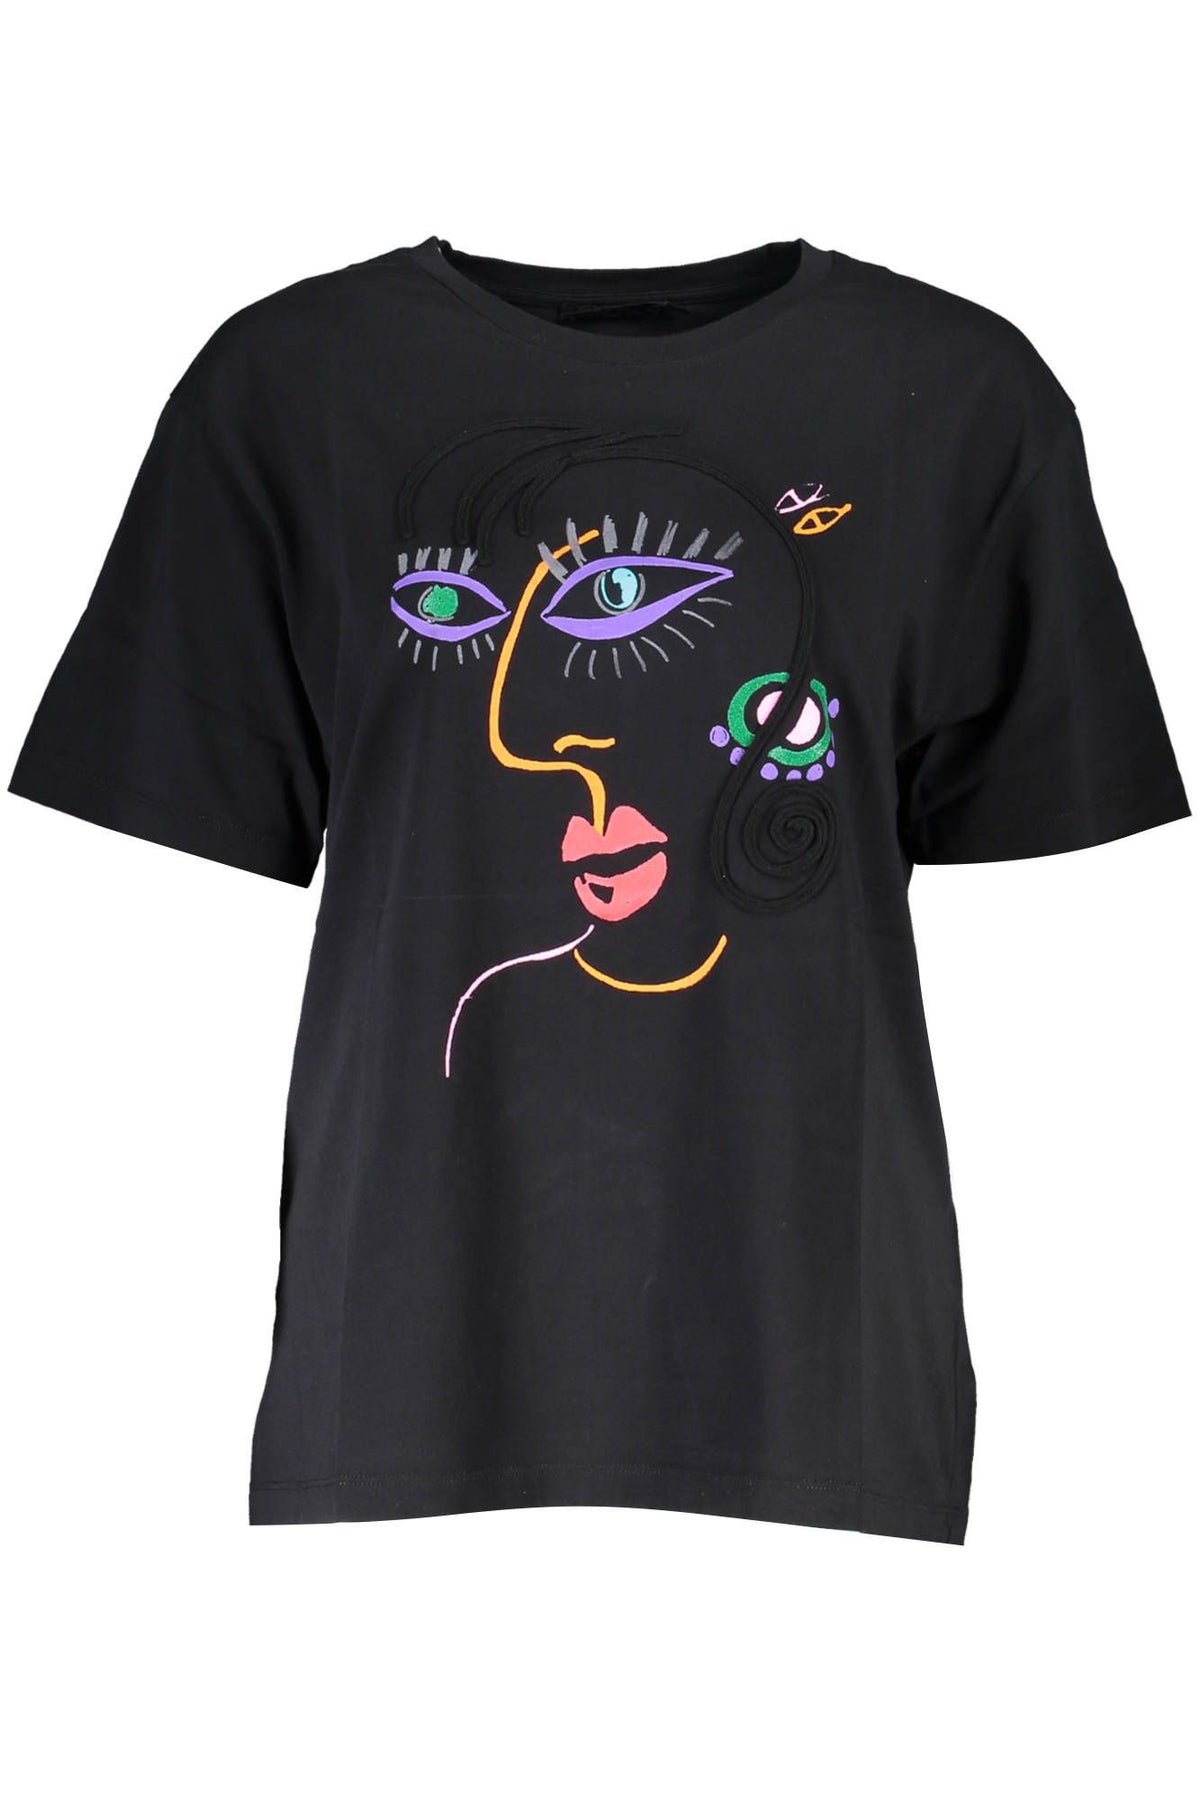 Desigual Chic Embroidered Black Tee with Artistic Flair